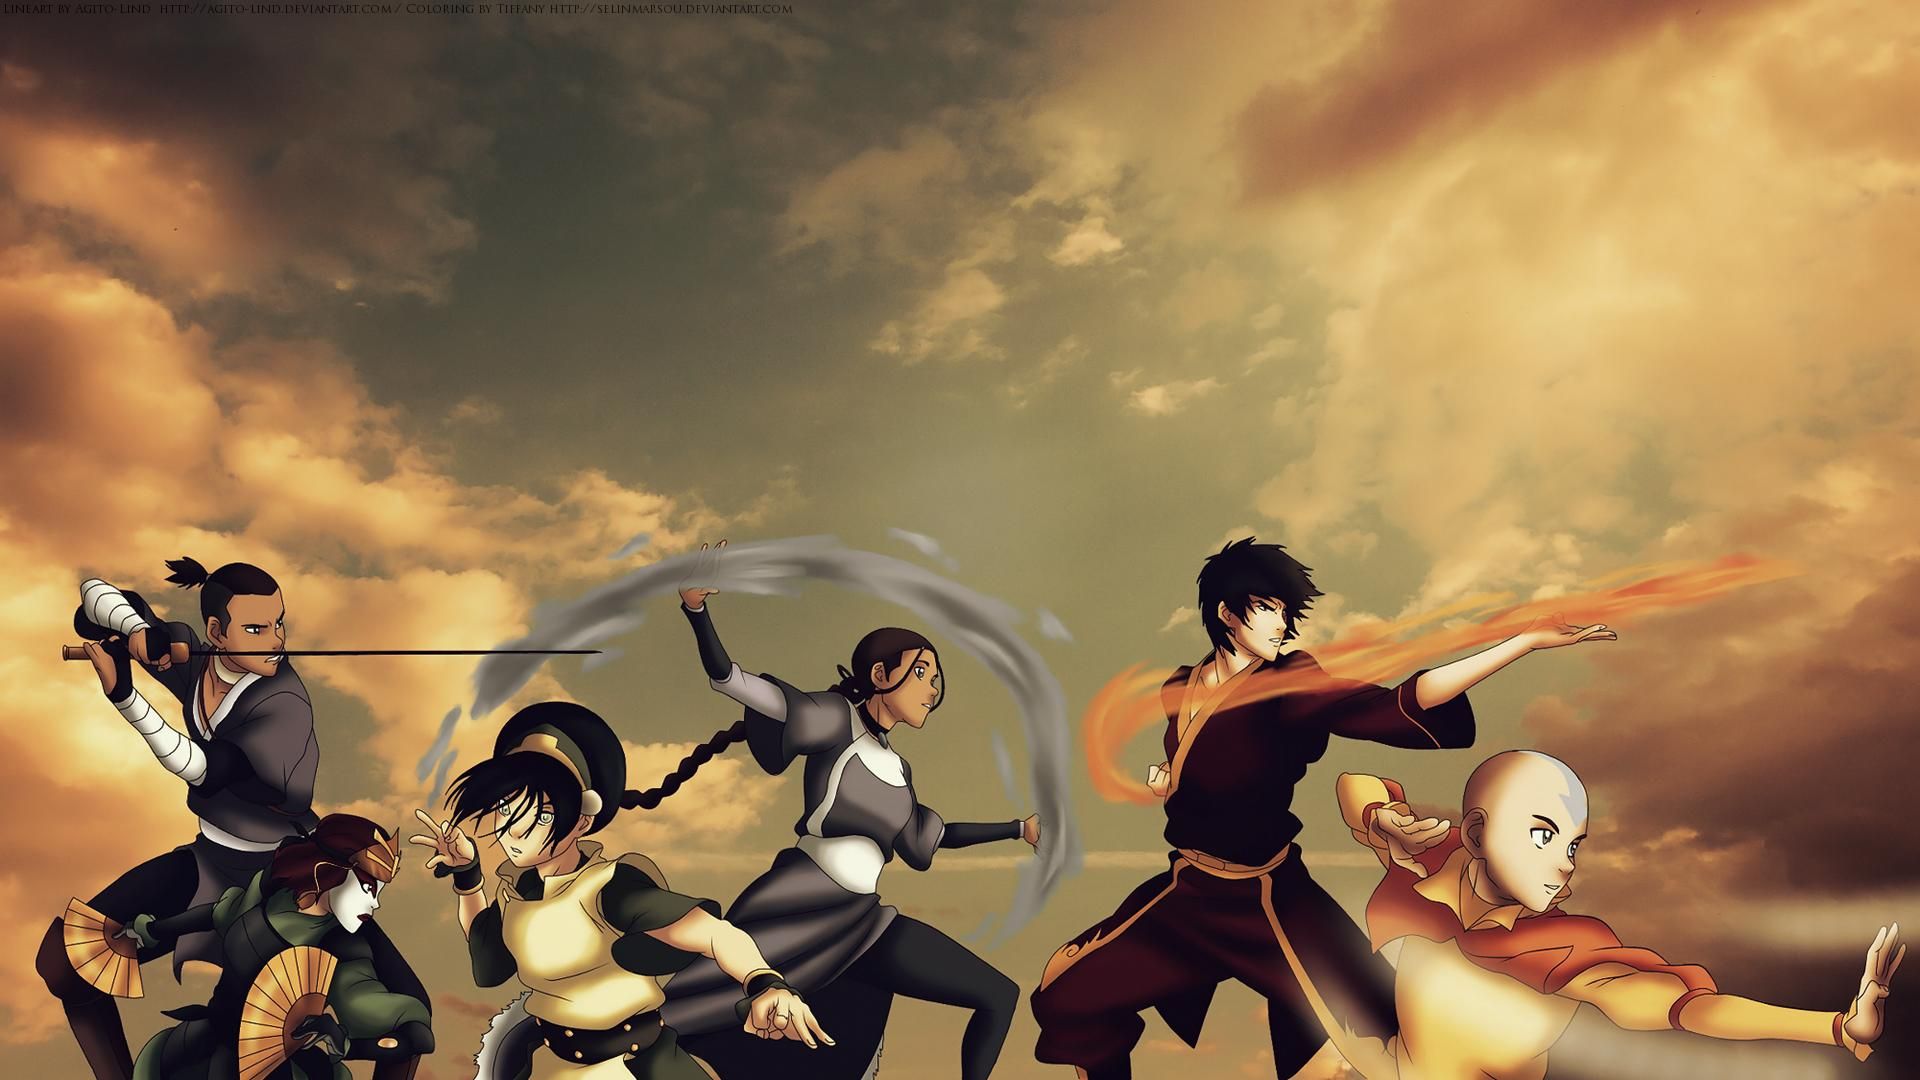 Avatar The Last Airbender Wallpapers High Quality | Download Free